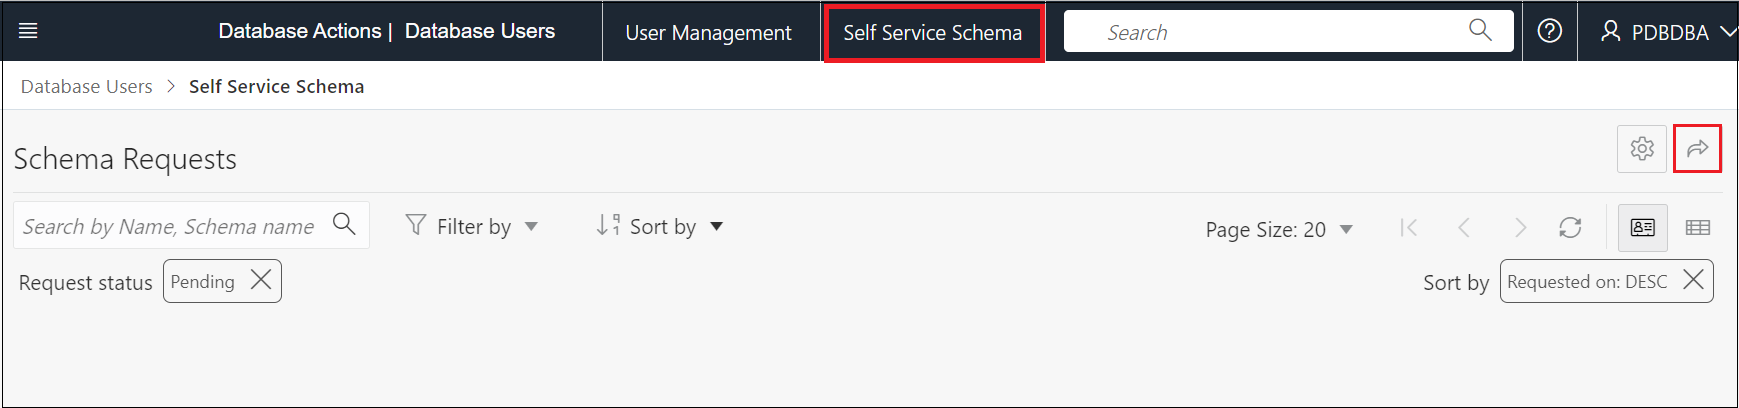 Self Service Schema tab on the Database Users page